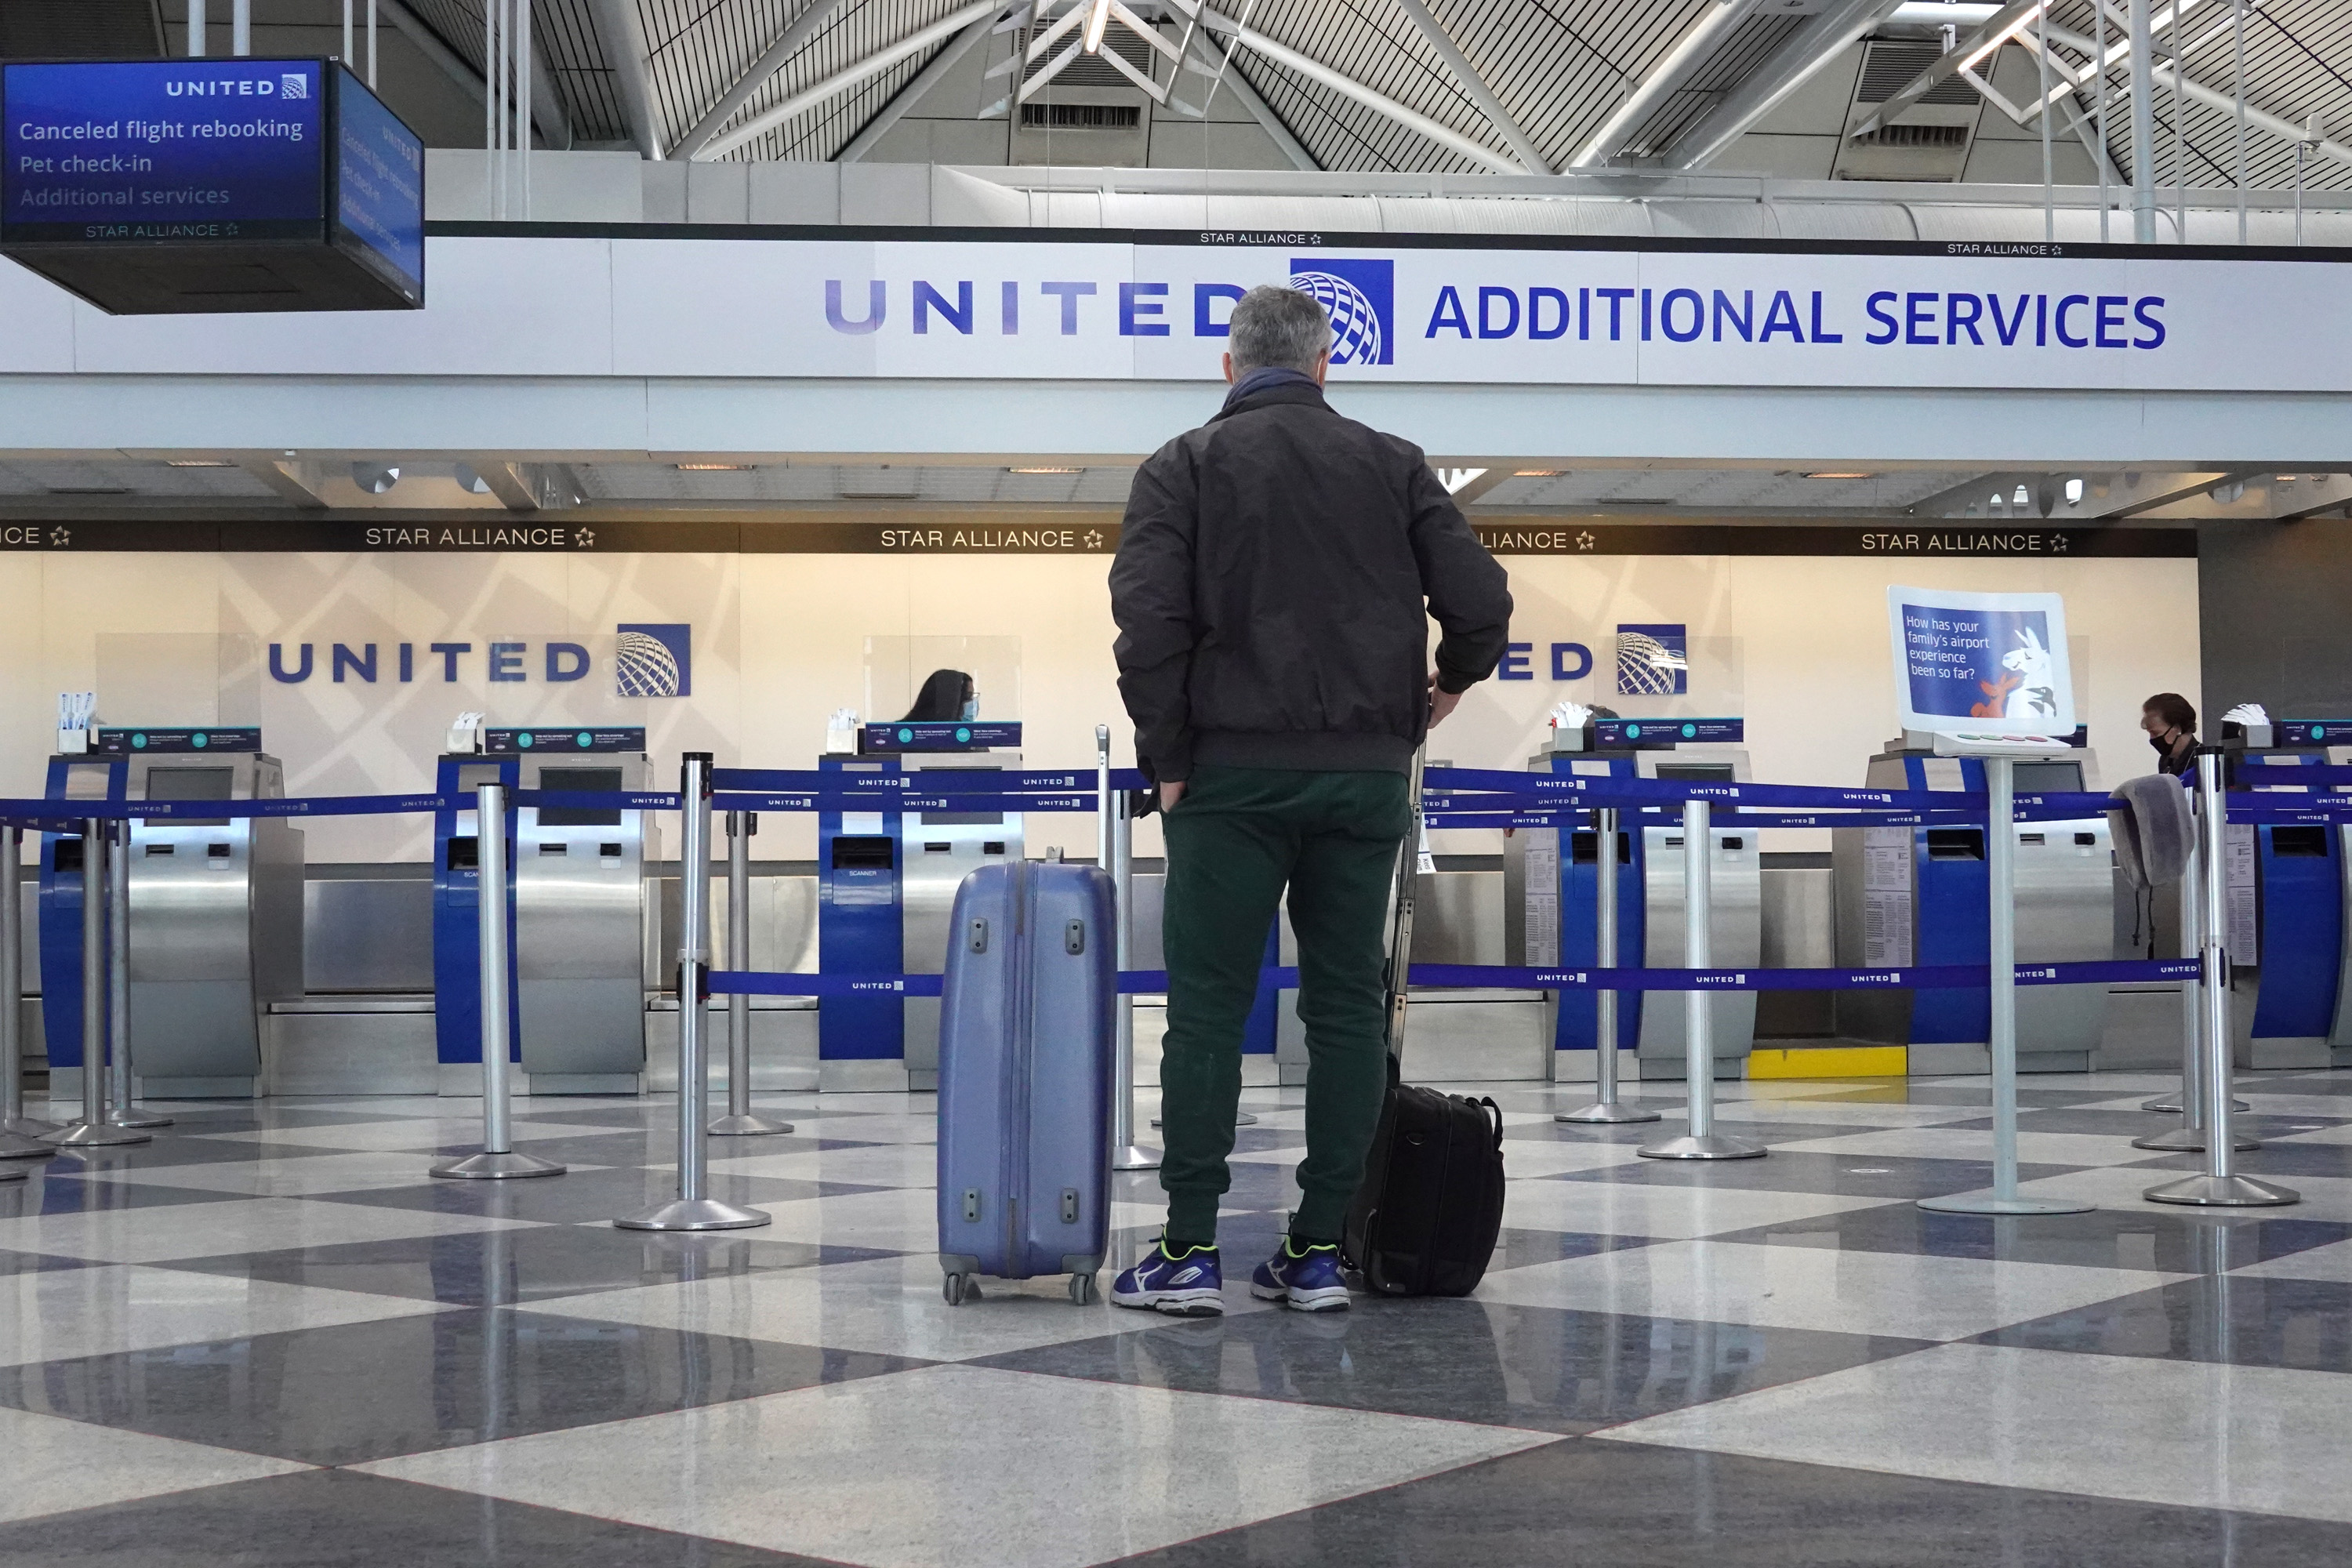 United Airlines And American Airlines Warns Of Furloughs As Travel Remains Devastated From Pandemic